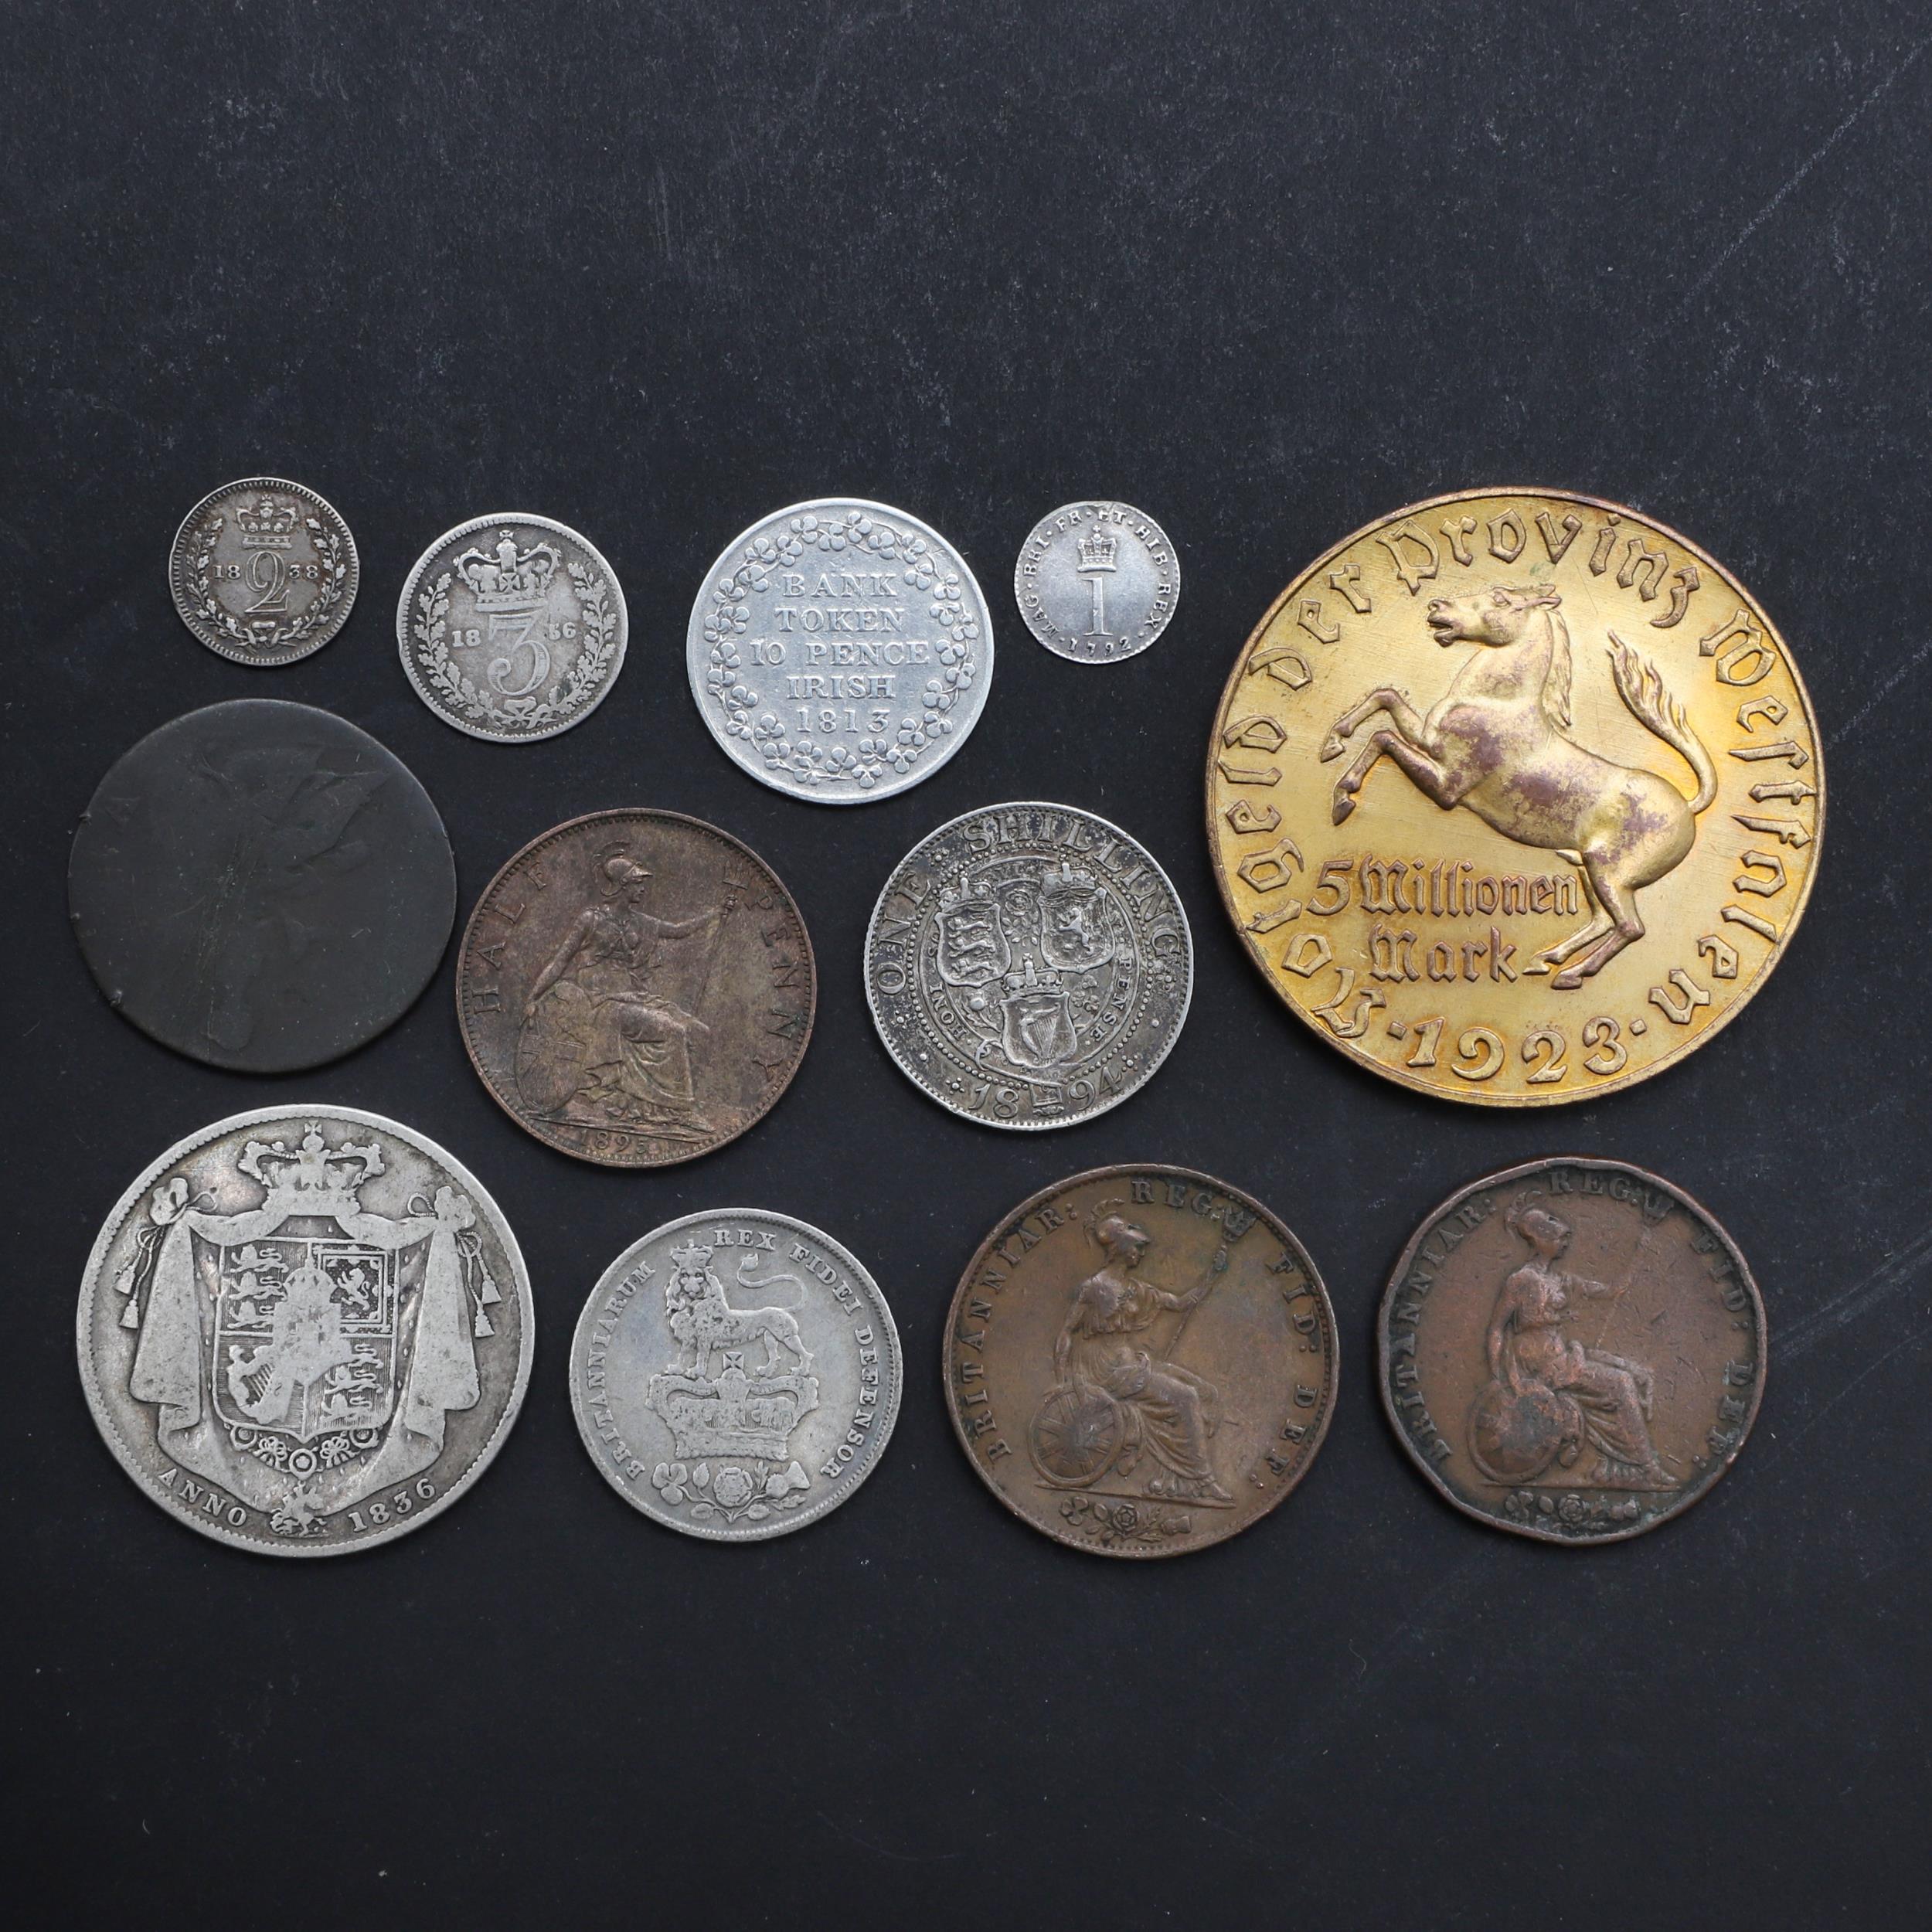 A GEORGE III MAUNDY PENNY AND OTHER SIMILAR COINS. - Image 2 of 3